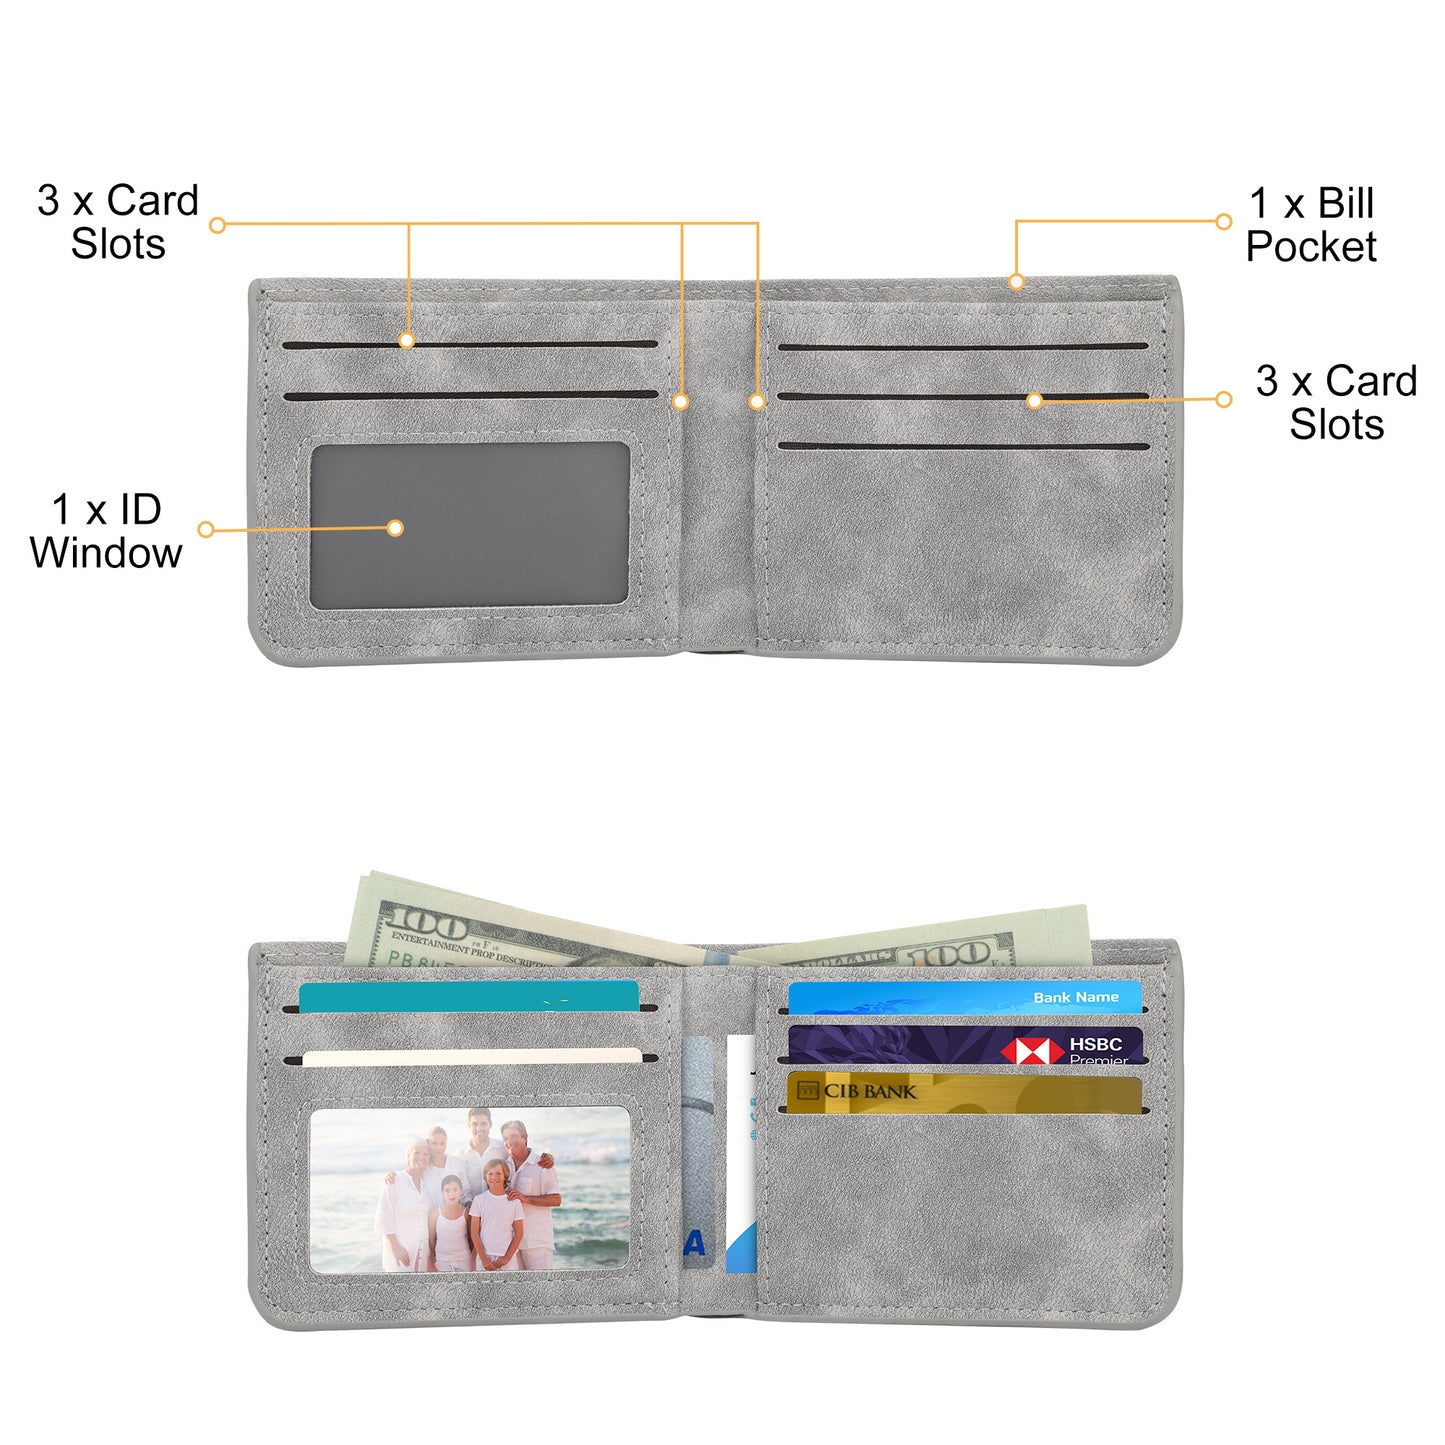 Mens PU Leather Slim Wallet - Extra Capacity Bifold Credit Card Holder Wallet,Card Wallet With ID Window for Every Occasion (Gray)